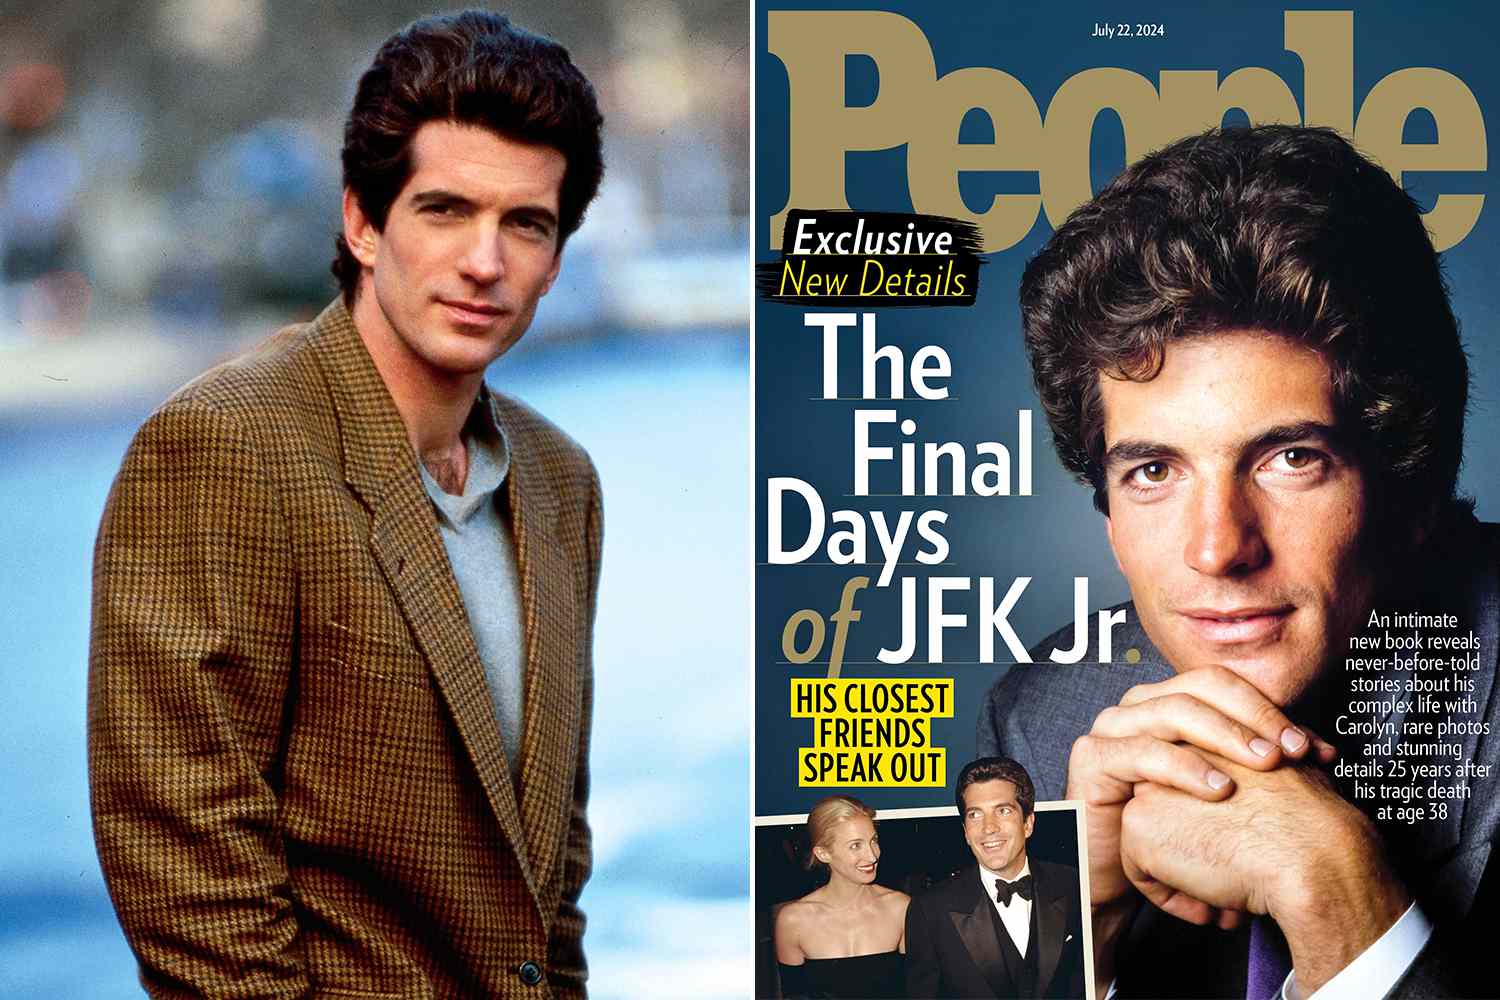 JFK Jr.'s Close Friends Share Intimate, Never-Before-Told Stories in Revealing Book Excerpt (Exclusive)